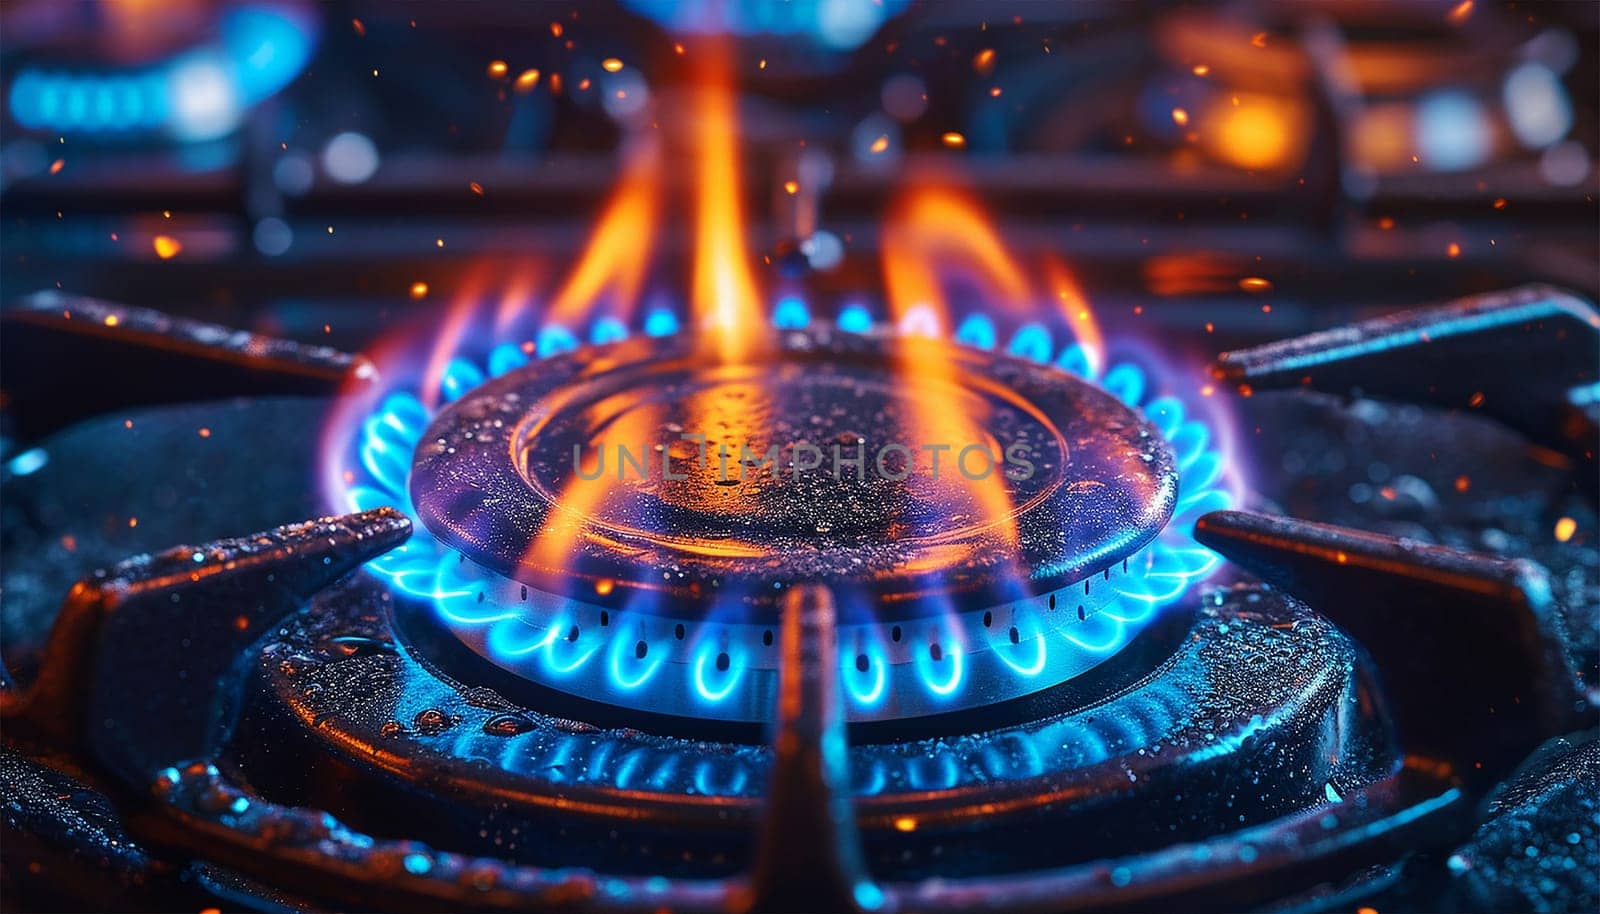 Burning gas stove. Closeup shot of blue fire from domestic kitchen stove top. Gas cooker with burning flames of propane gas. Industrial resources and economy concept. Kitchen gas flames by Annebel146